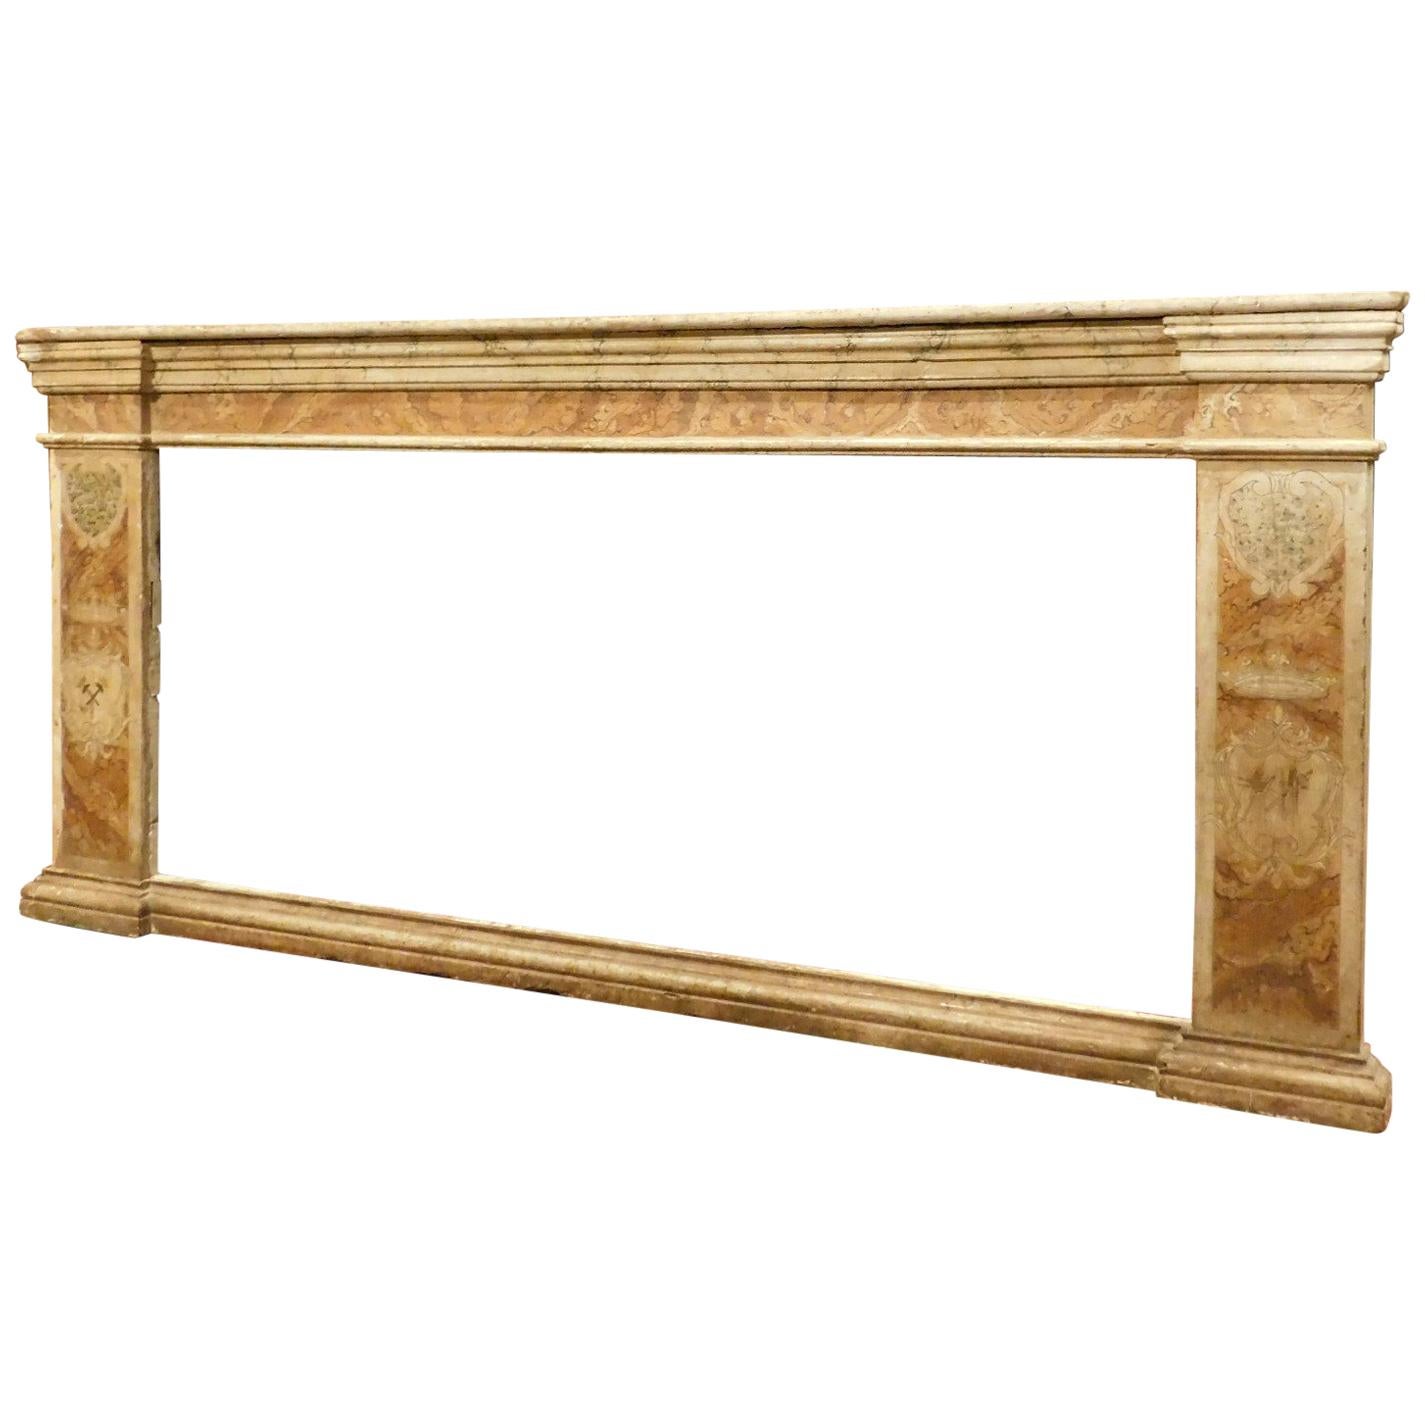 Antique Faux Beige Marble and Peach Lacquered Frame, Italian Church, 1700 For Sale